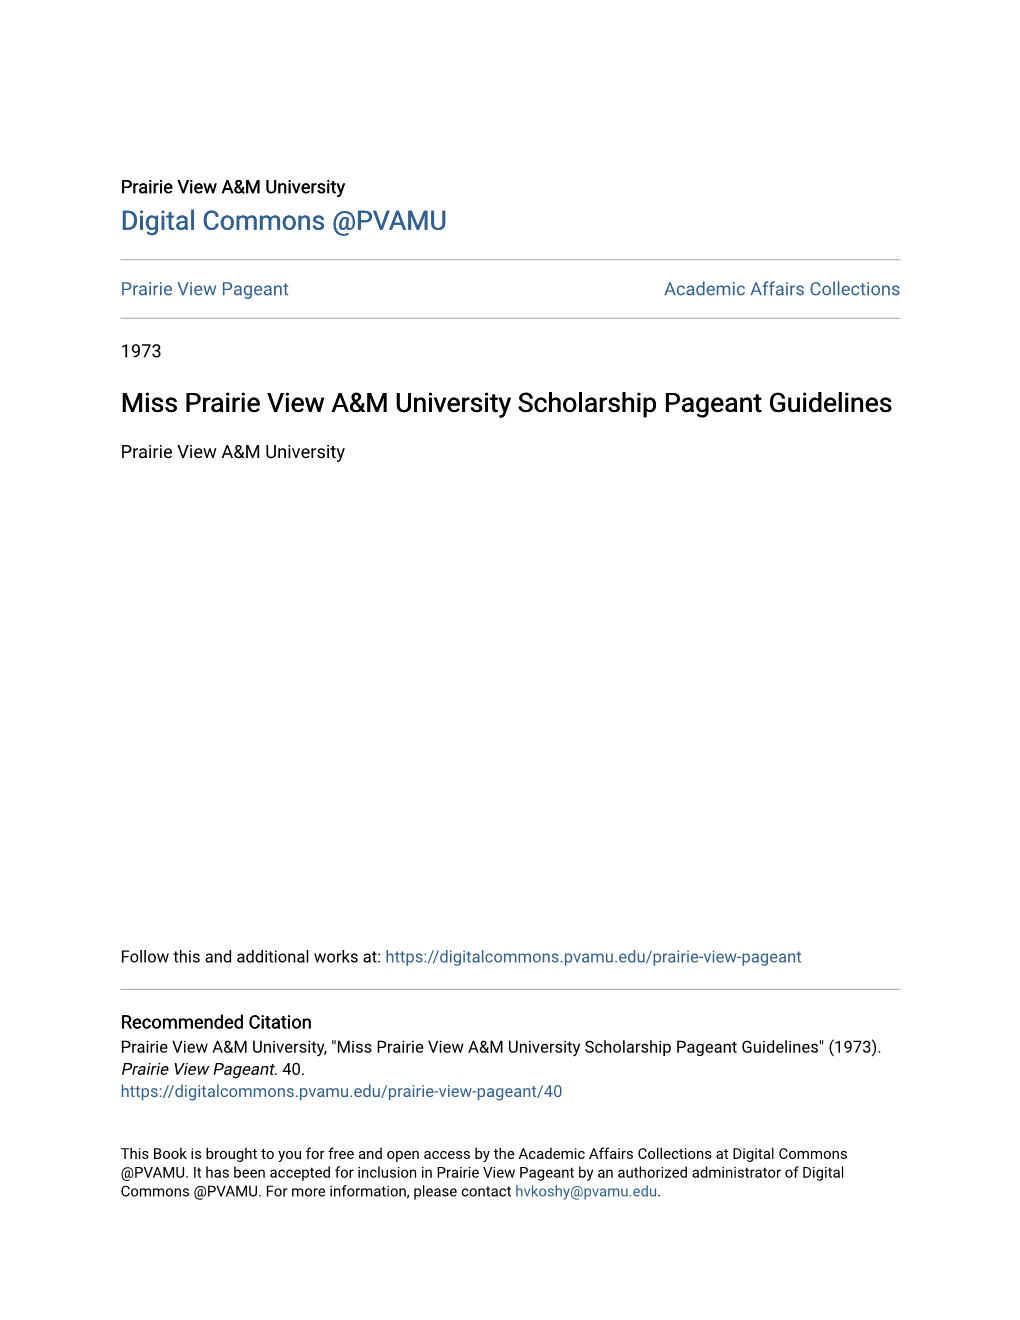 Miss Prairie View A&M University Scholarship Pageant Guidelines